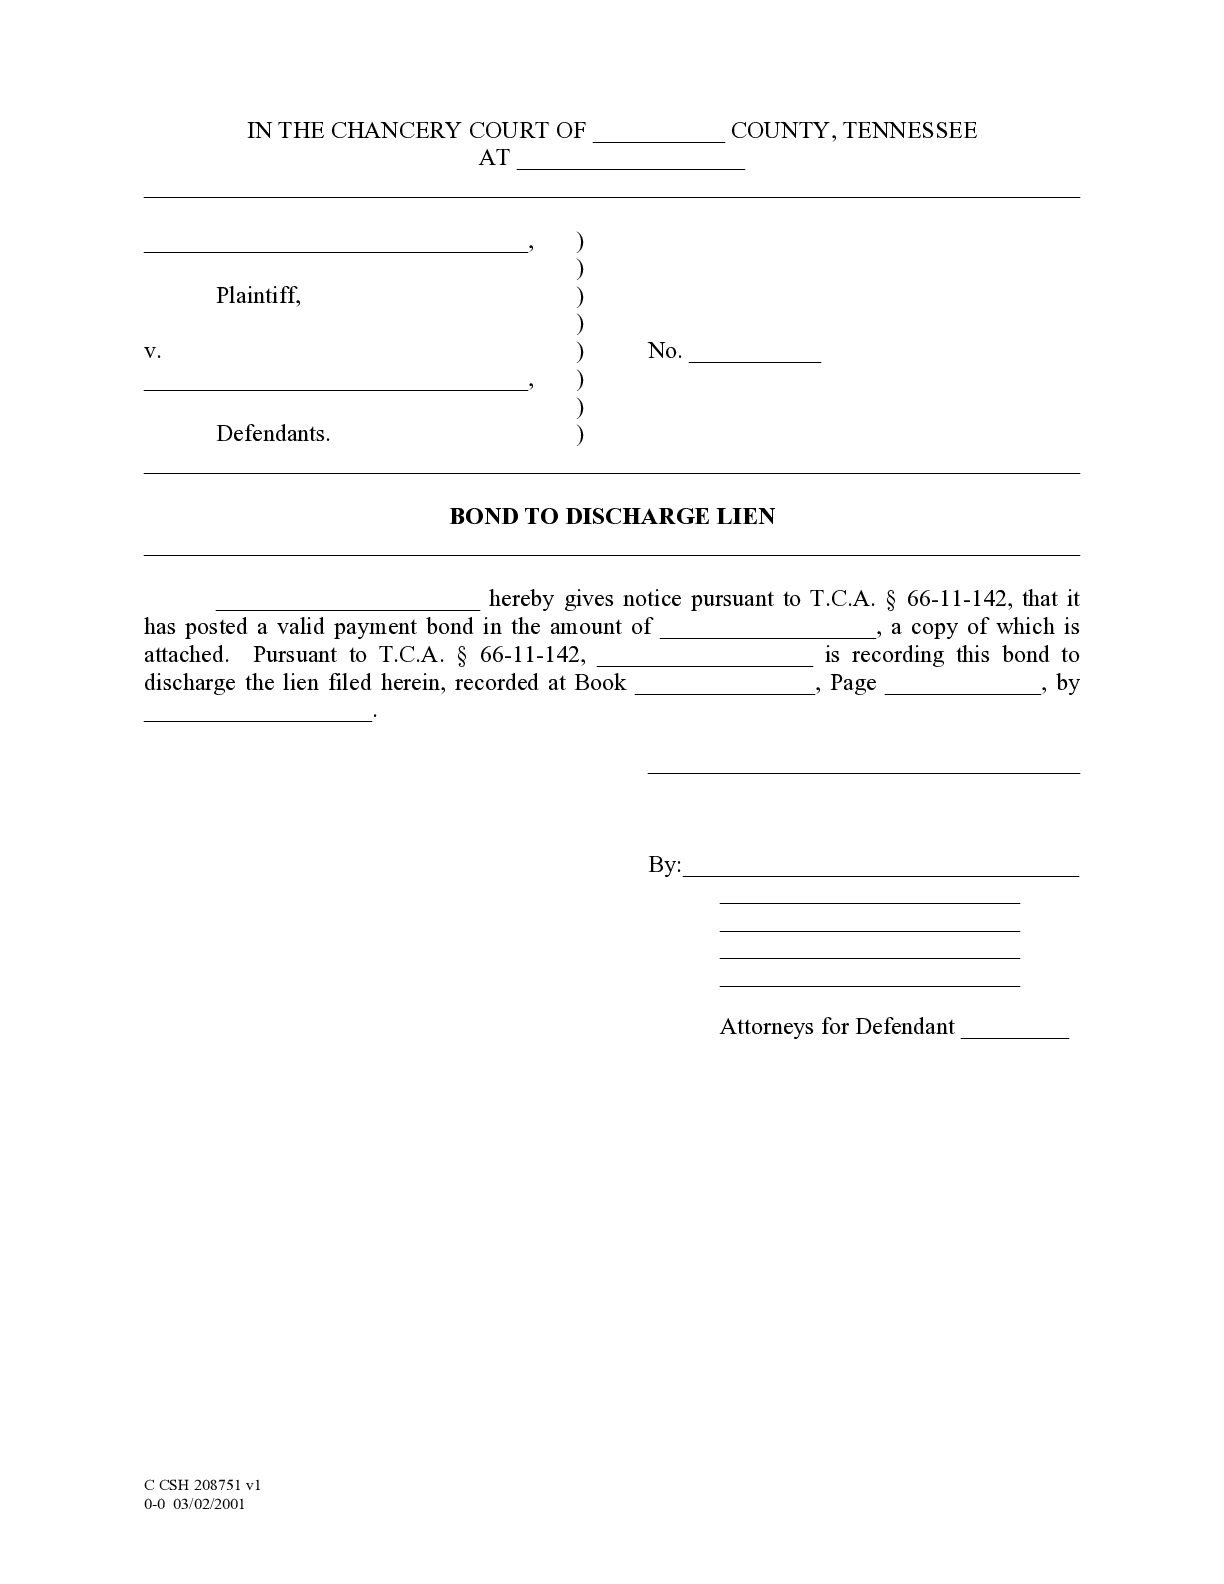 Tennessee Bond to Discharge Lien Form - free from